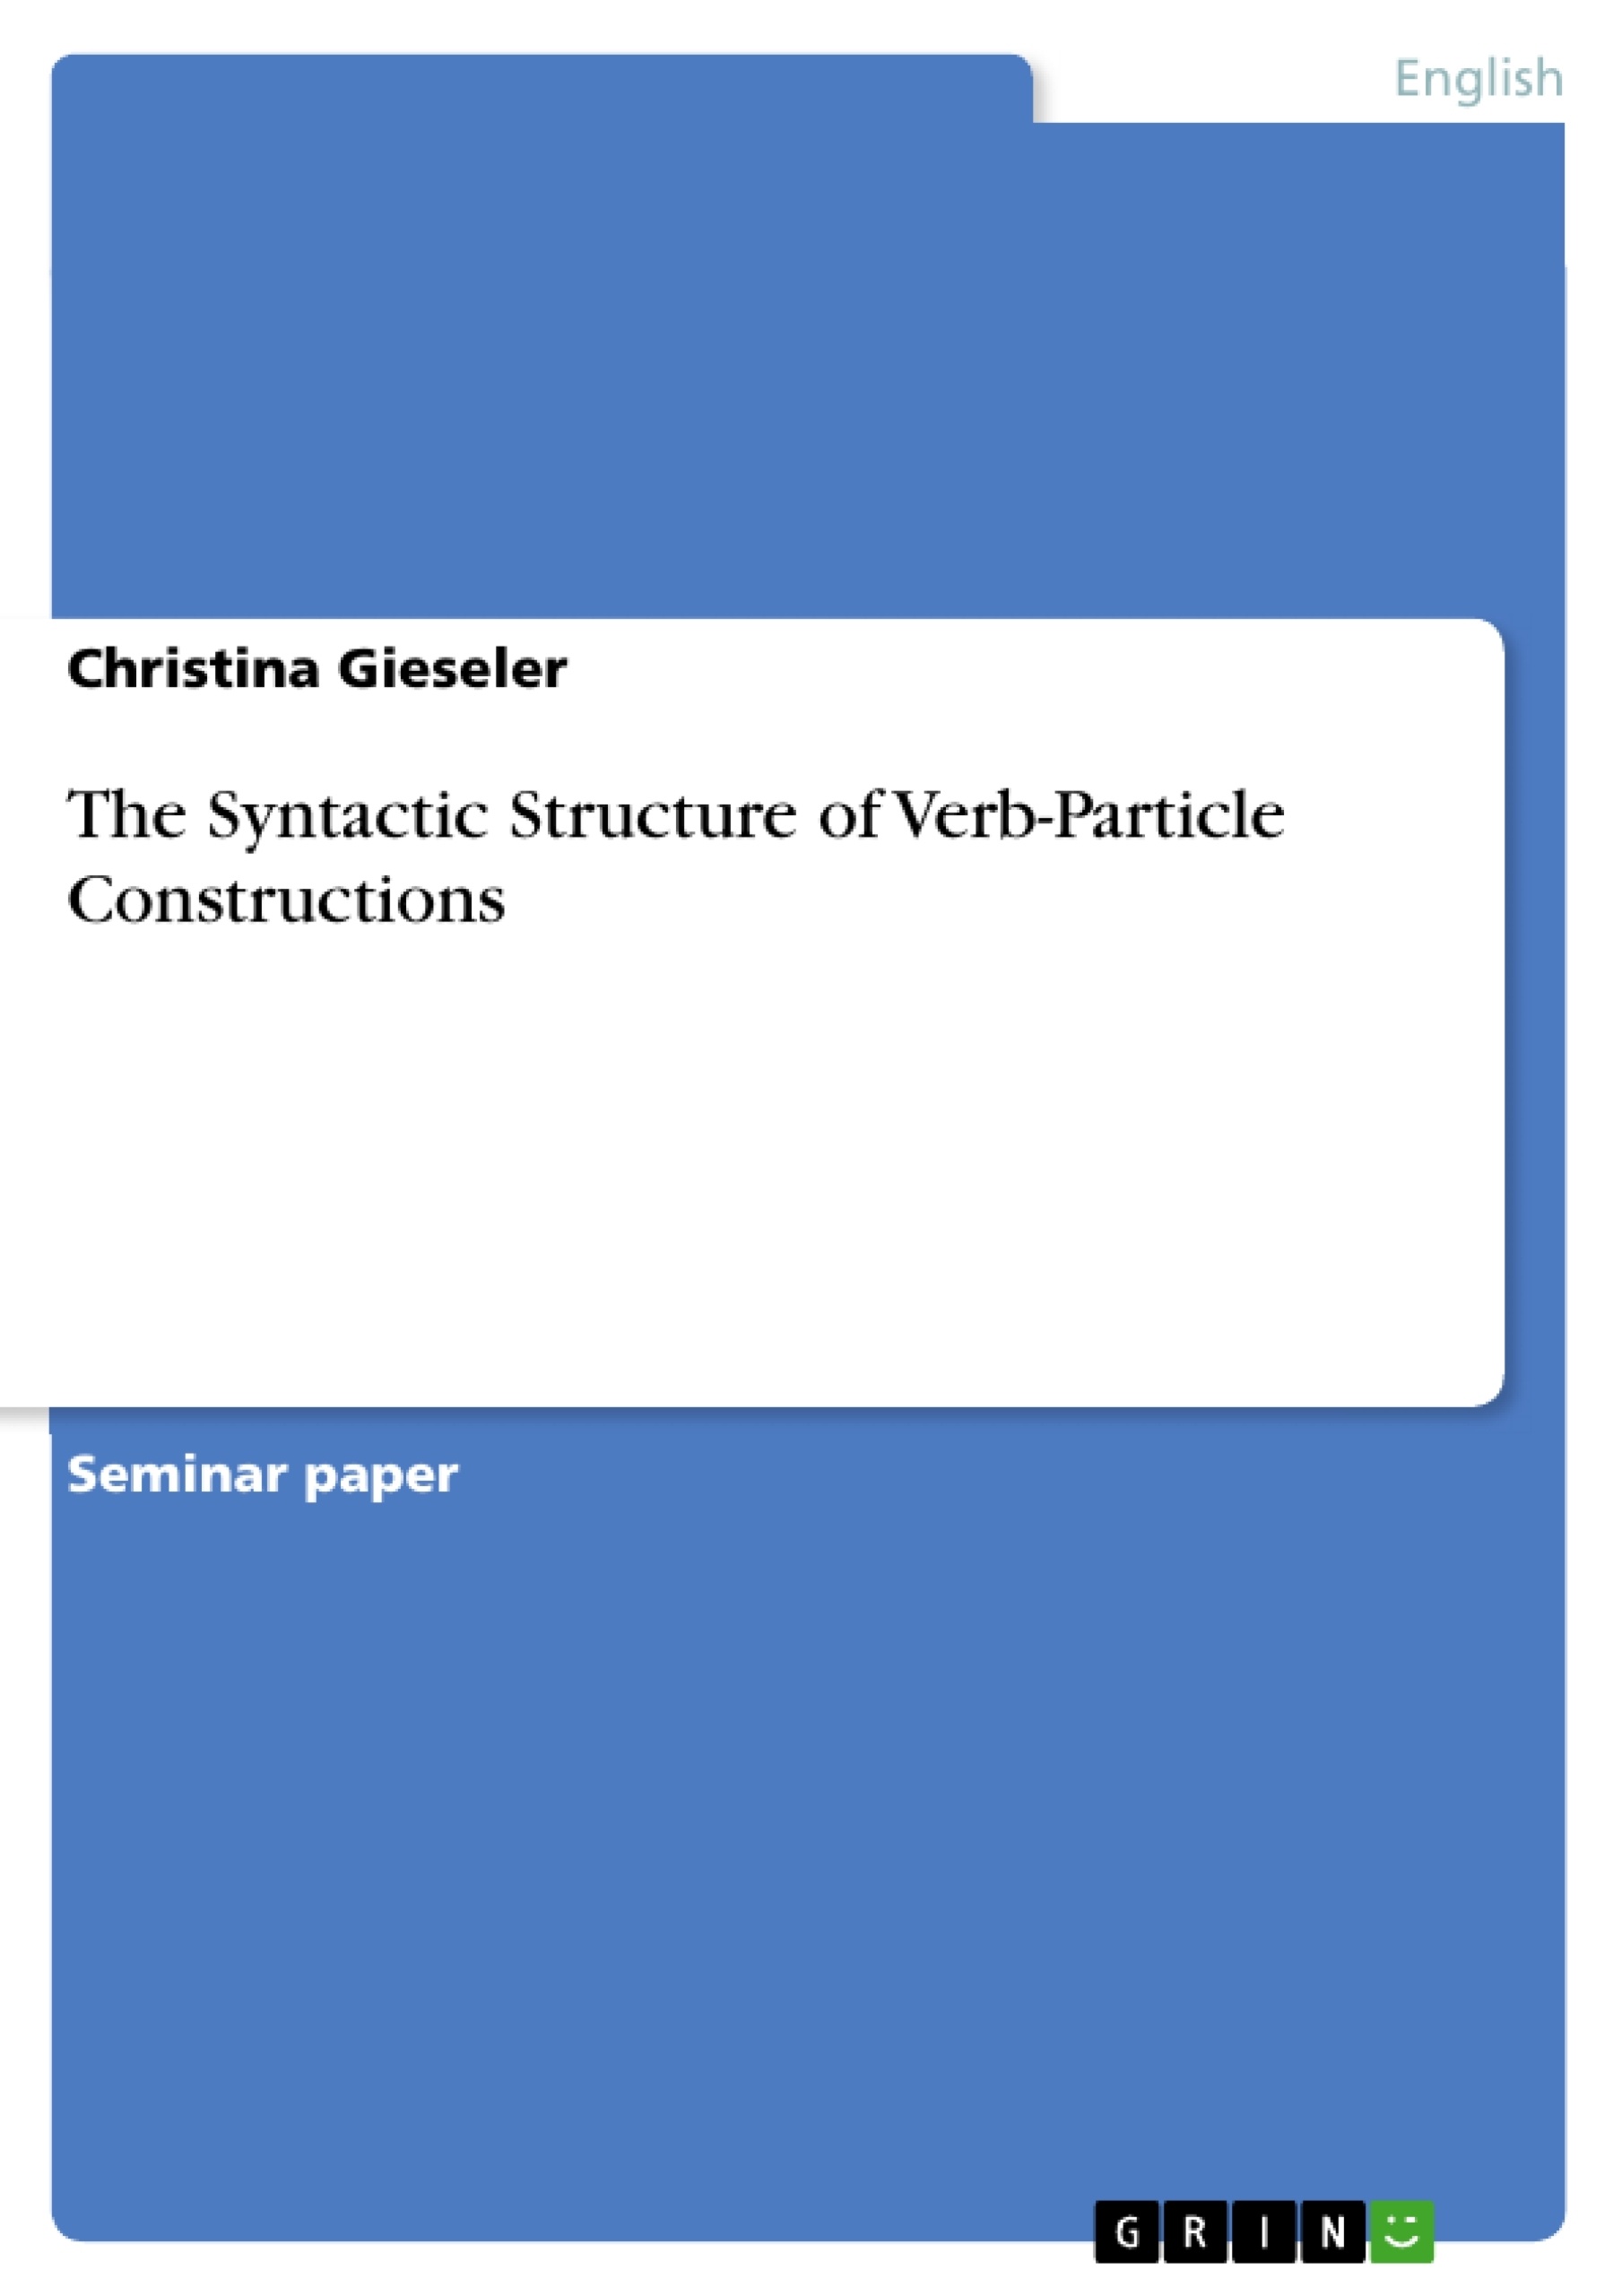 Title: The Syntactic Structure of Verb-Particle Constructions